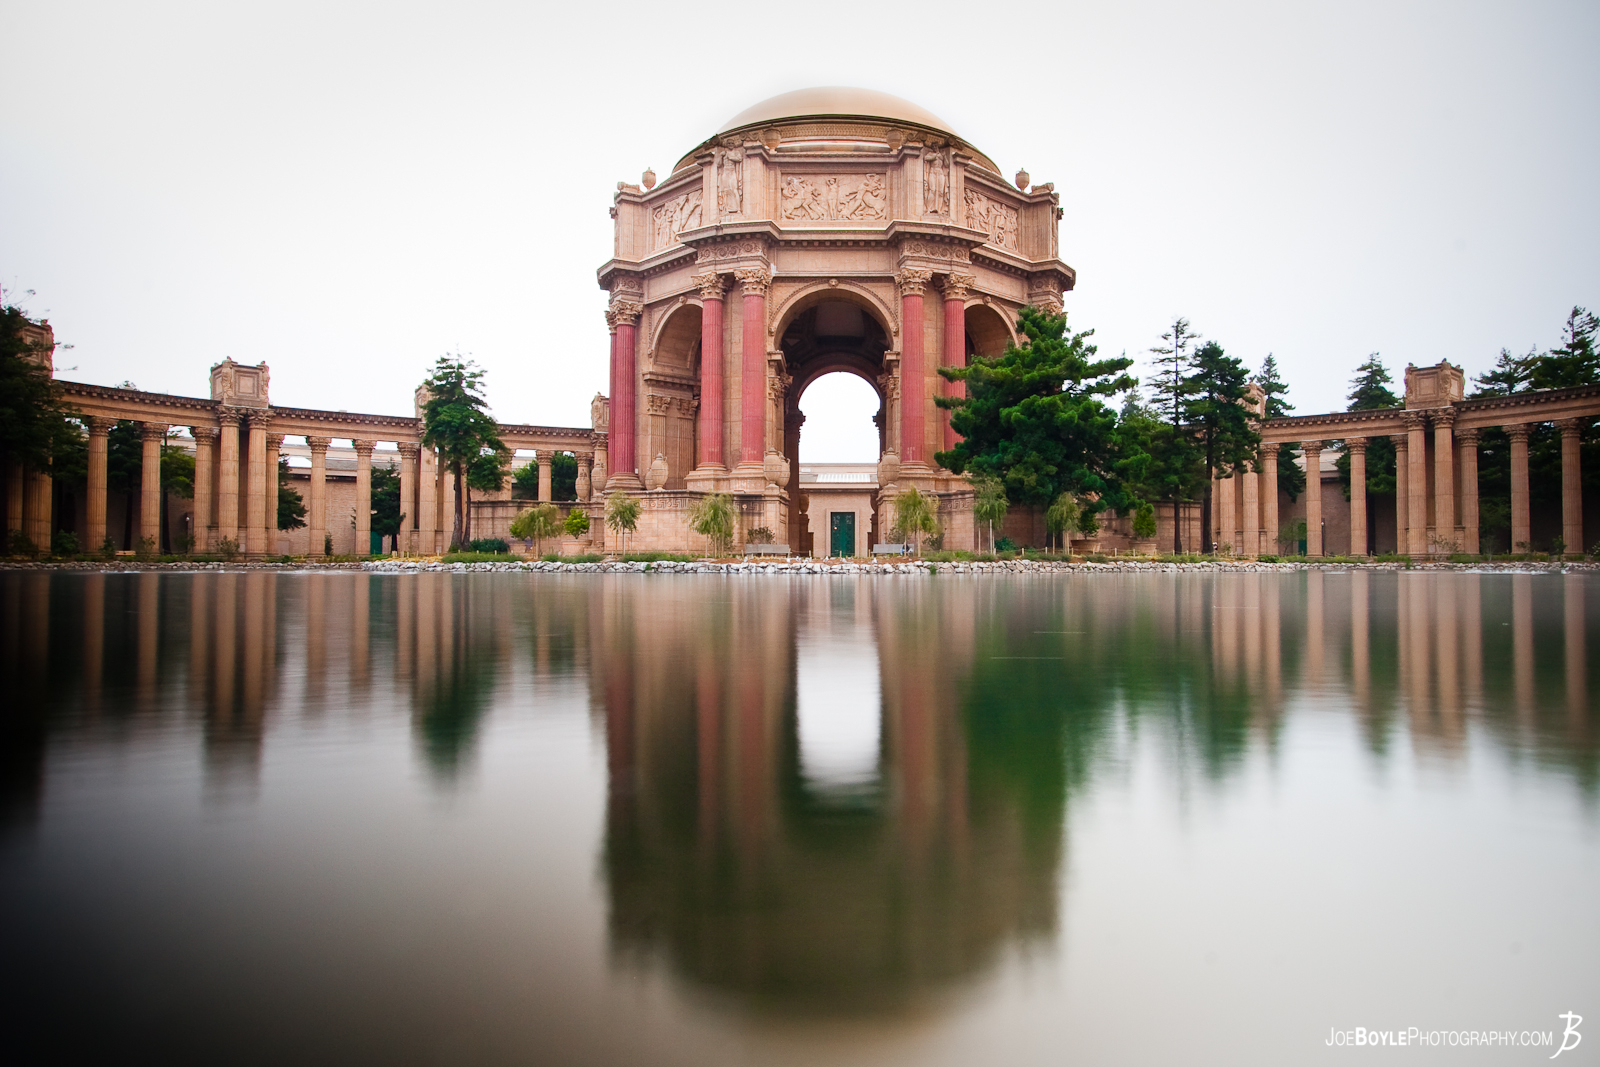  A photo of the San Francisco Palace's Rotunda and pond. This was my last stop in San Francisco before I had to leave. I spent a good portion of the day circling around the palace taking photos - I couldn't help myself! 